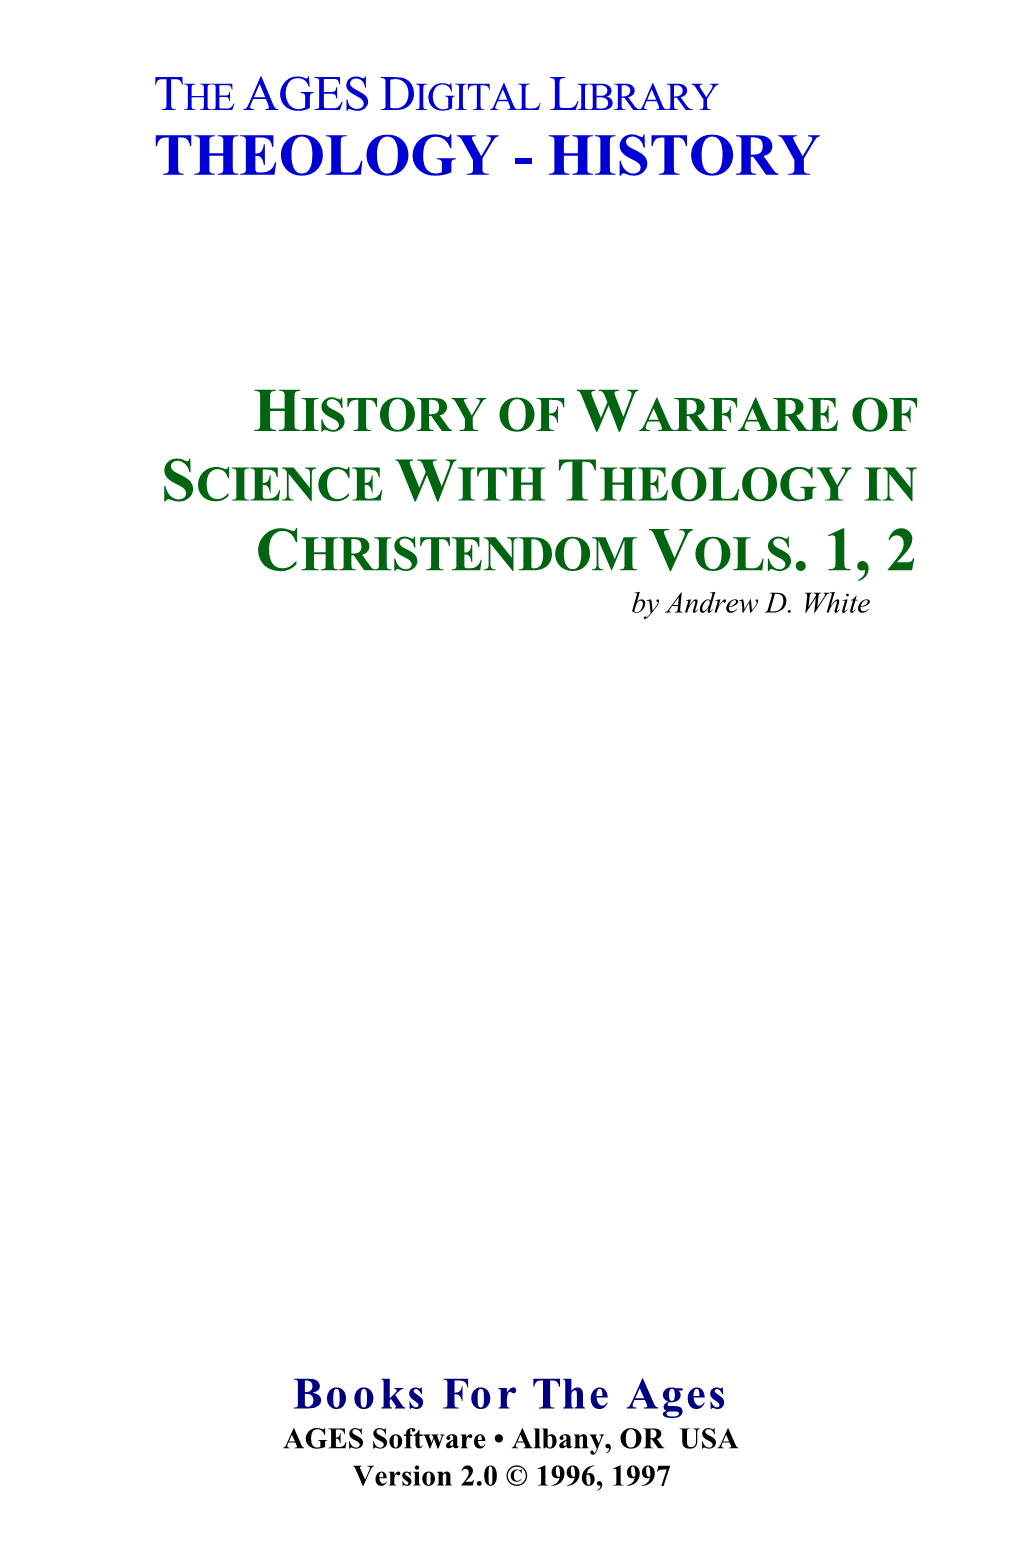 The History of Warfare of Science with Theology